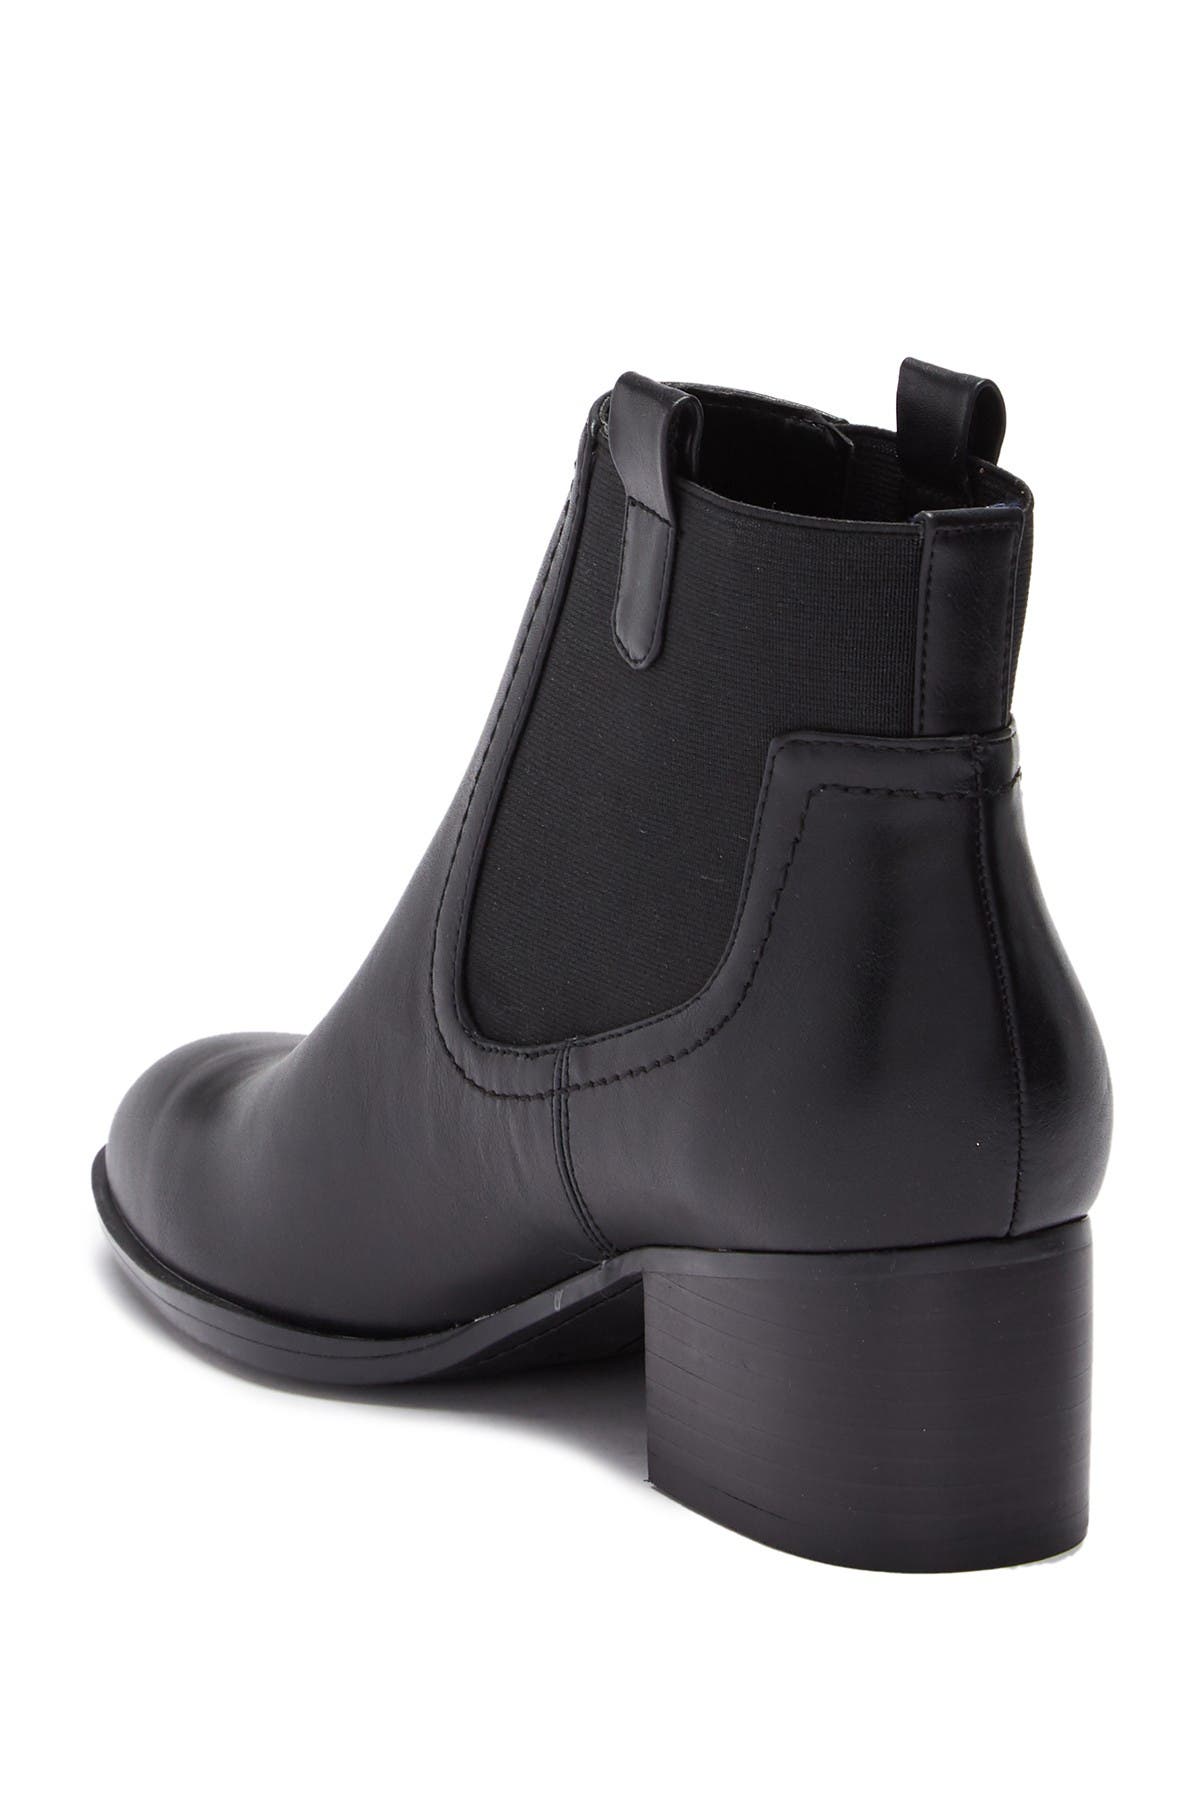 tommy hilfiger roxy faux leather chelsea boot